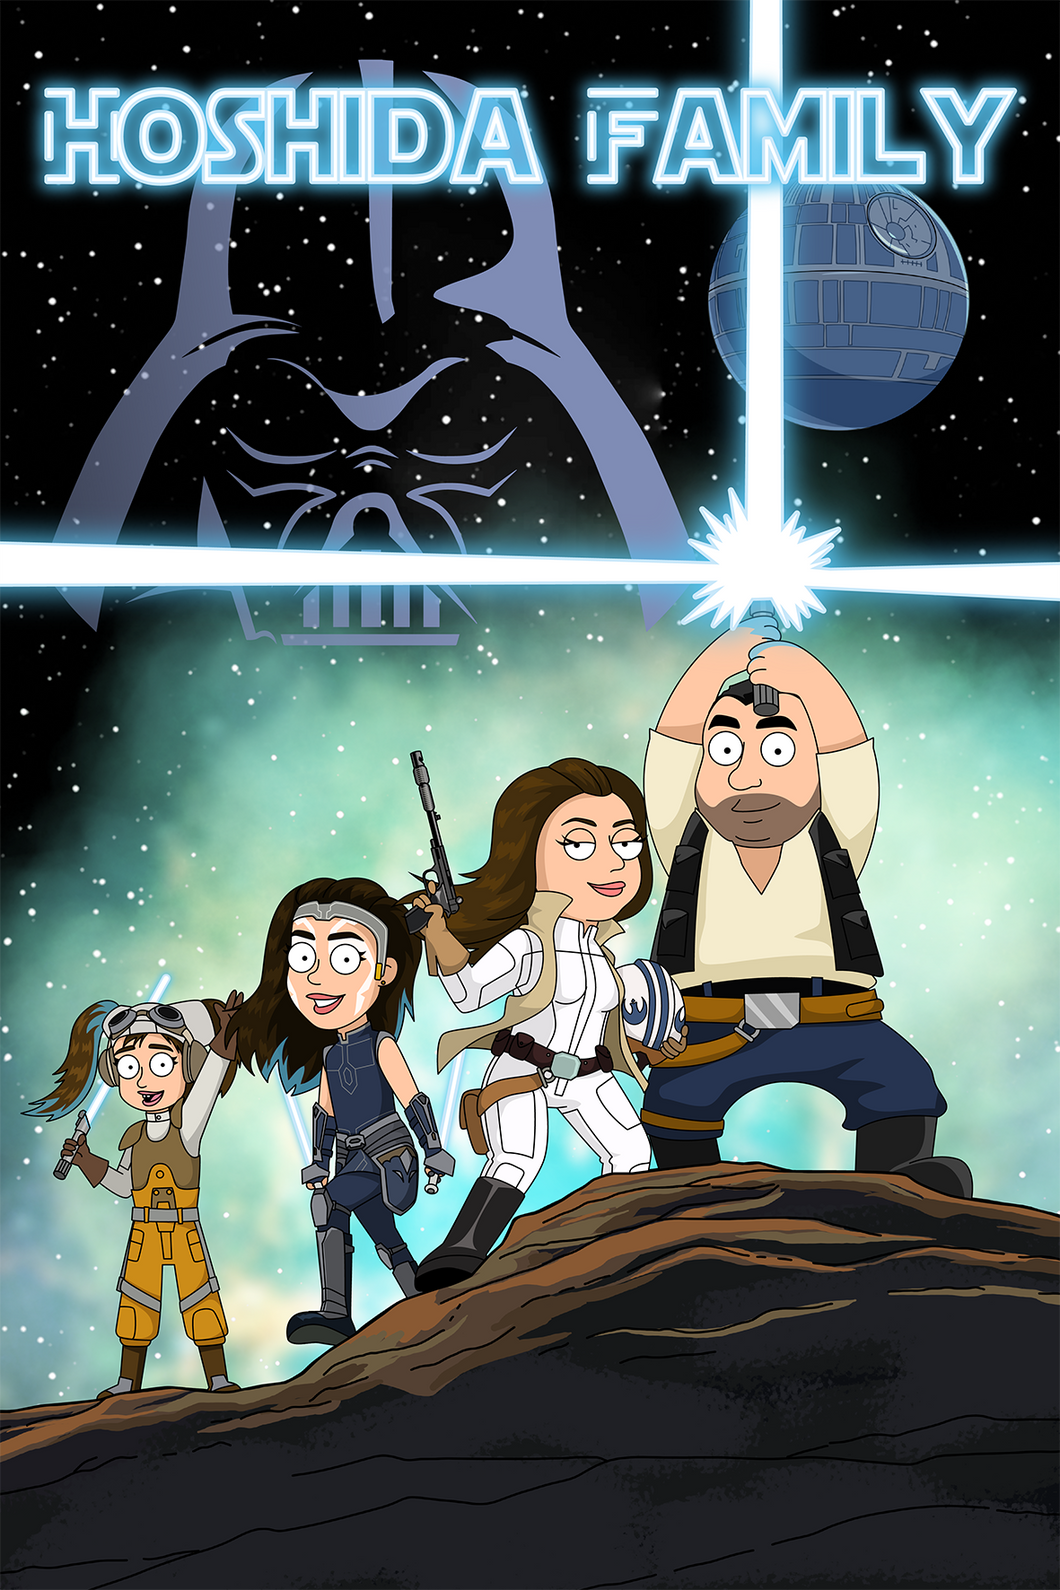 A family of 4 in the galaxy background holding lightsabers, with Hoshida Family written on the top in this Galaxy Wars style portrait.